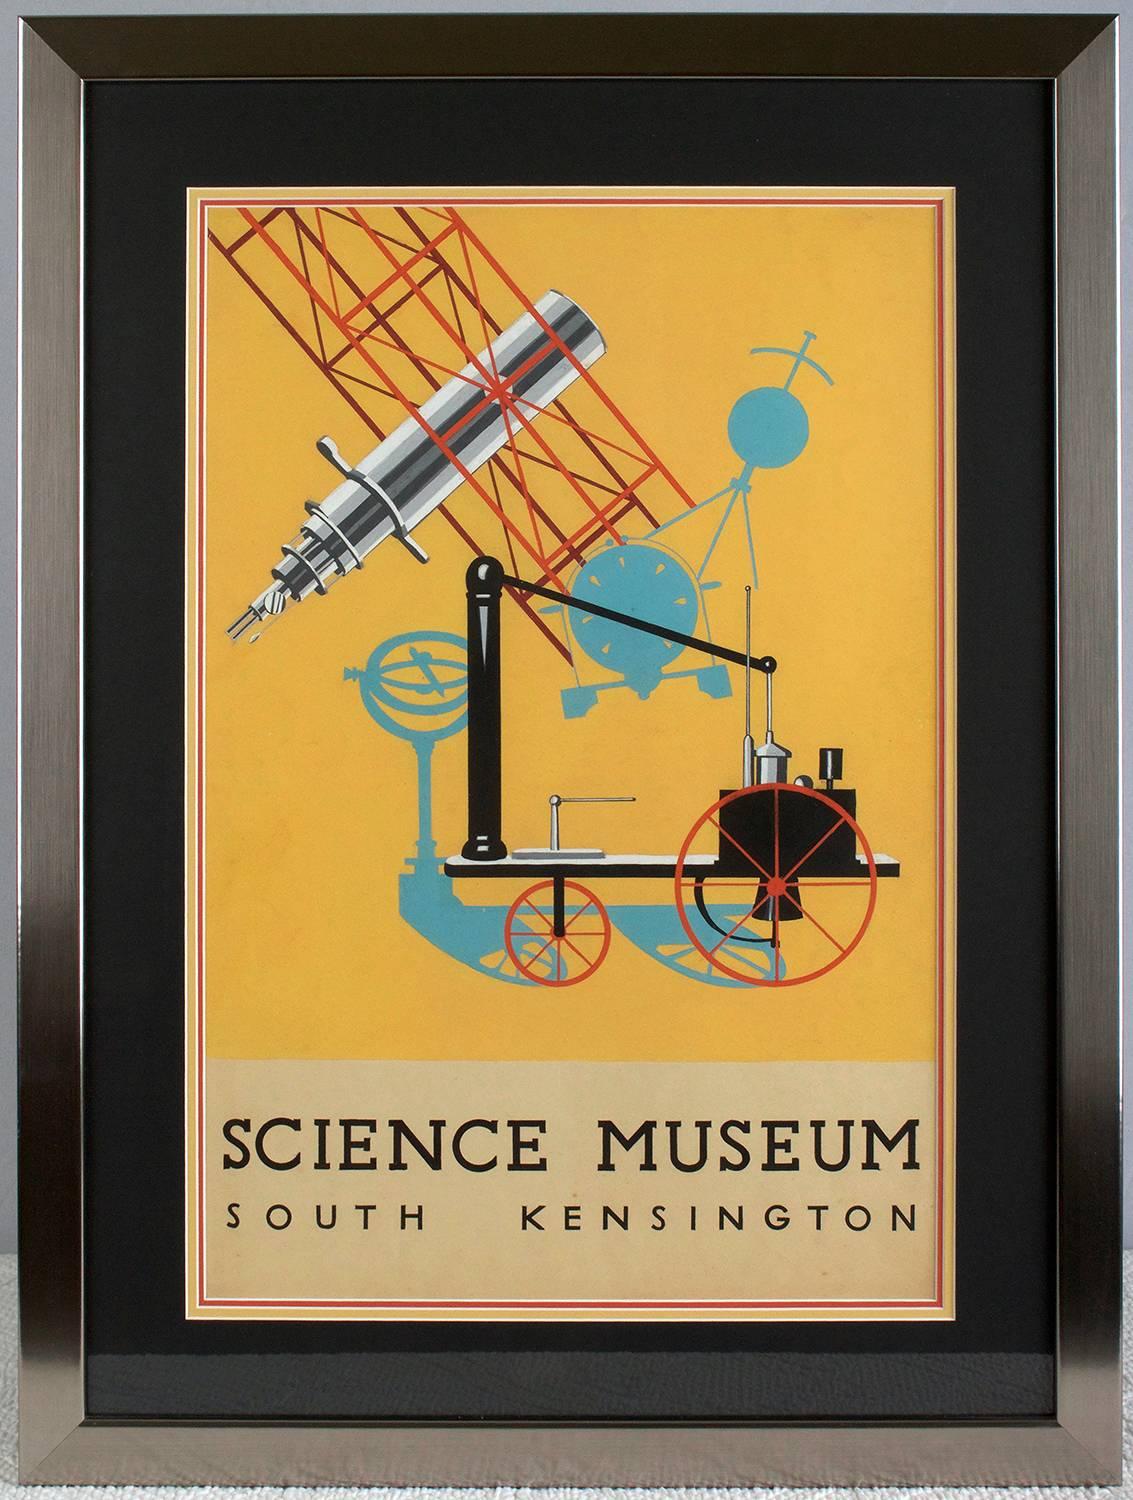 Science Museum; South Kensington - Painting by Eileen McKinney